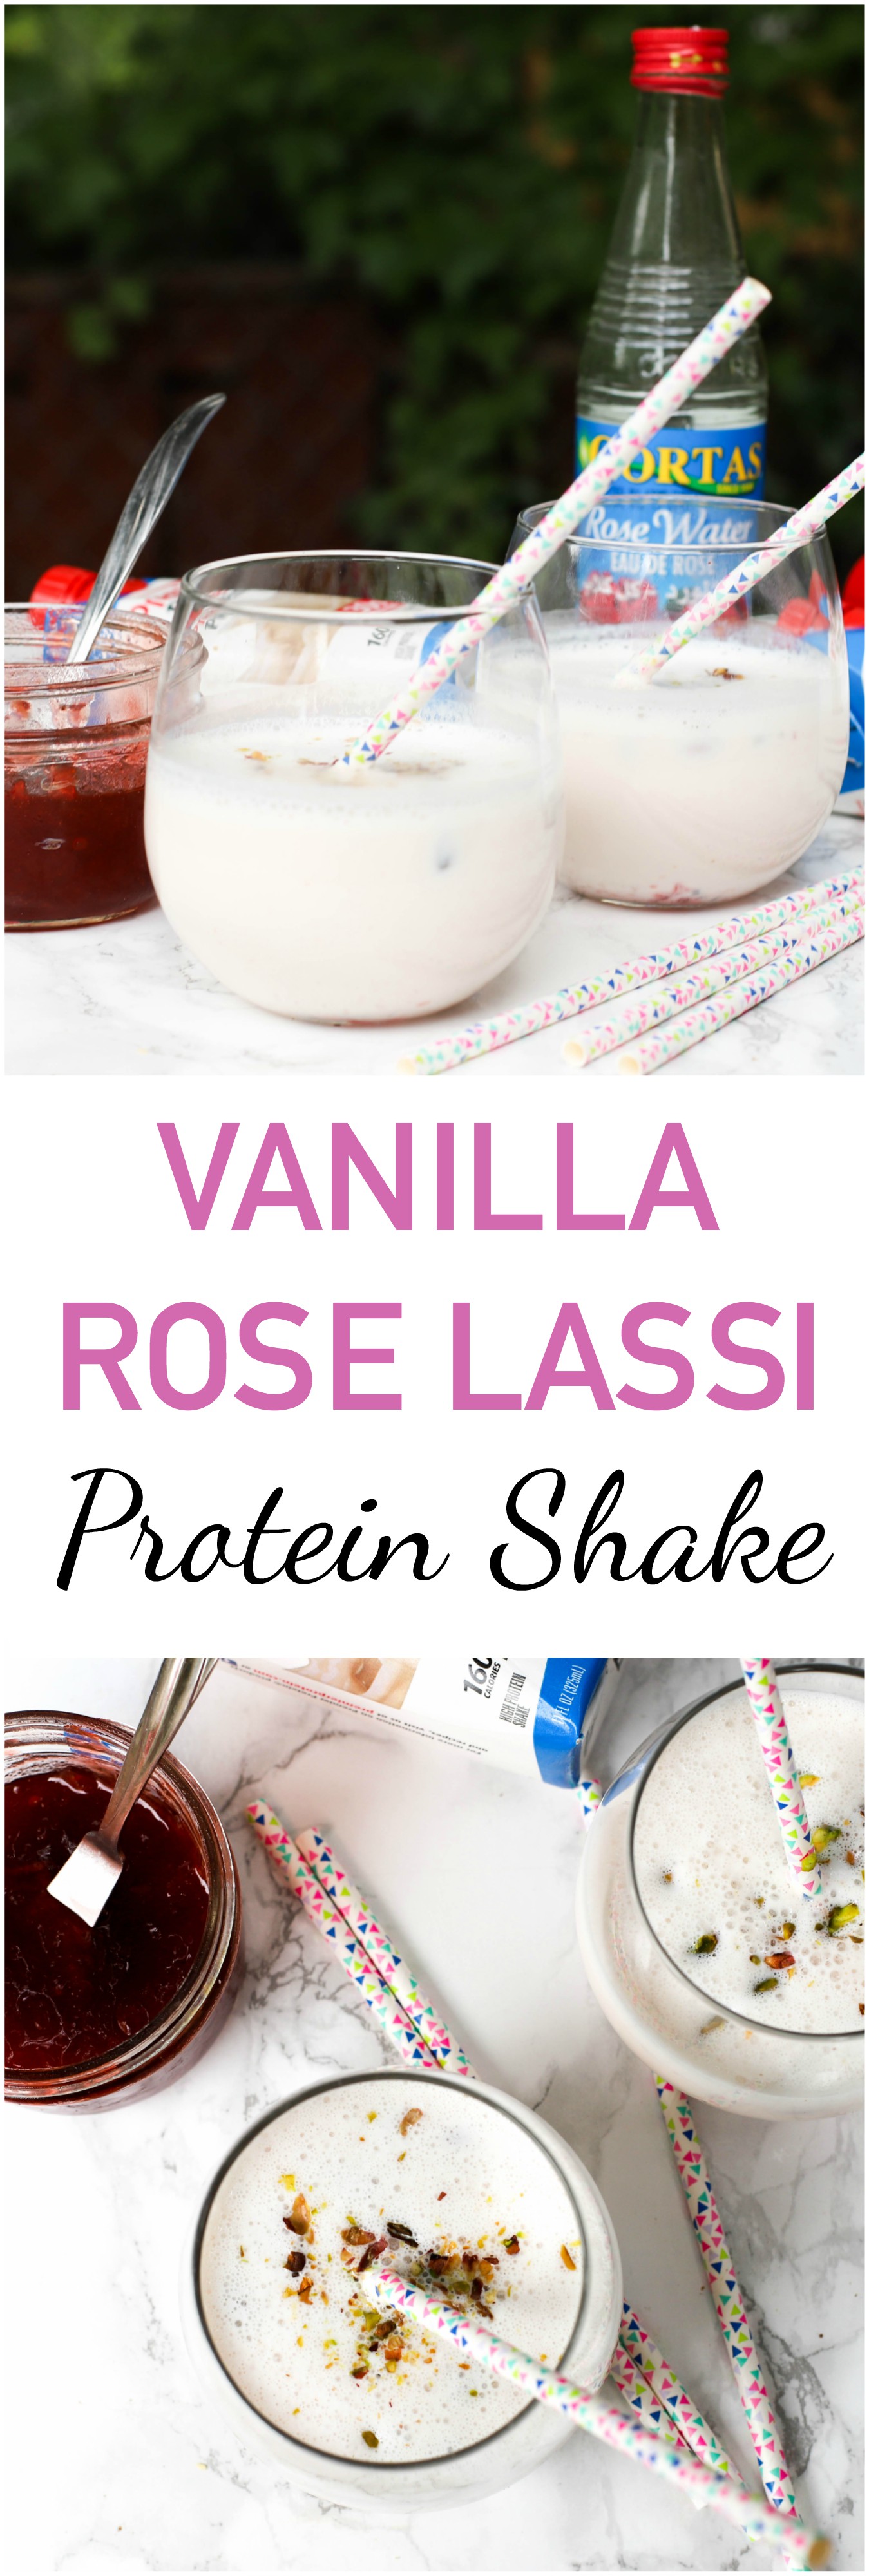 anilla Rose Lassi Protein Shake is a delicious shake that is high in protein and packed with so many flavors from rose jam, rose water, and cardamom!